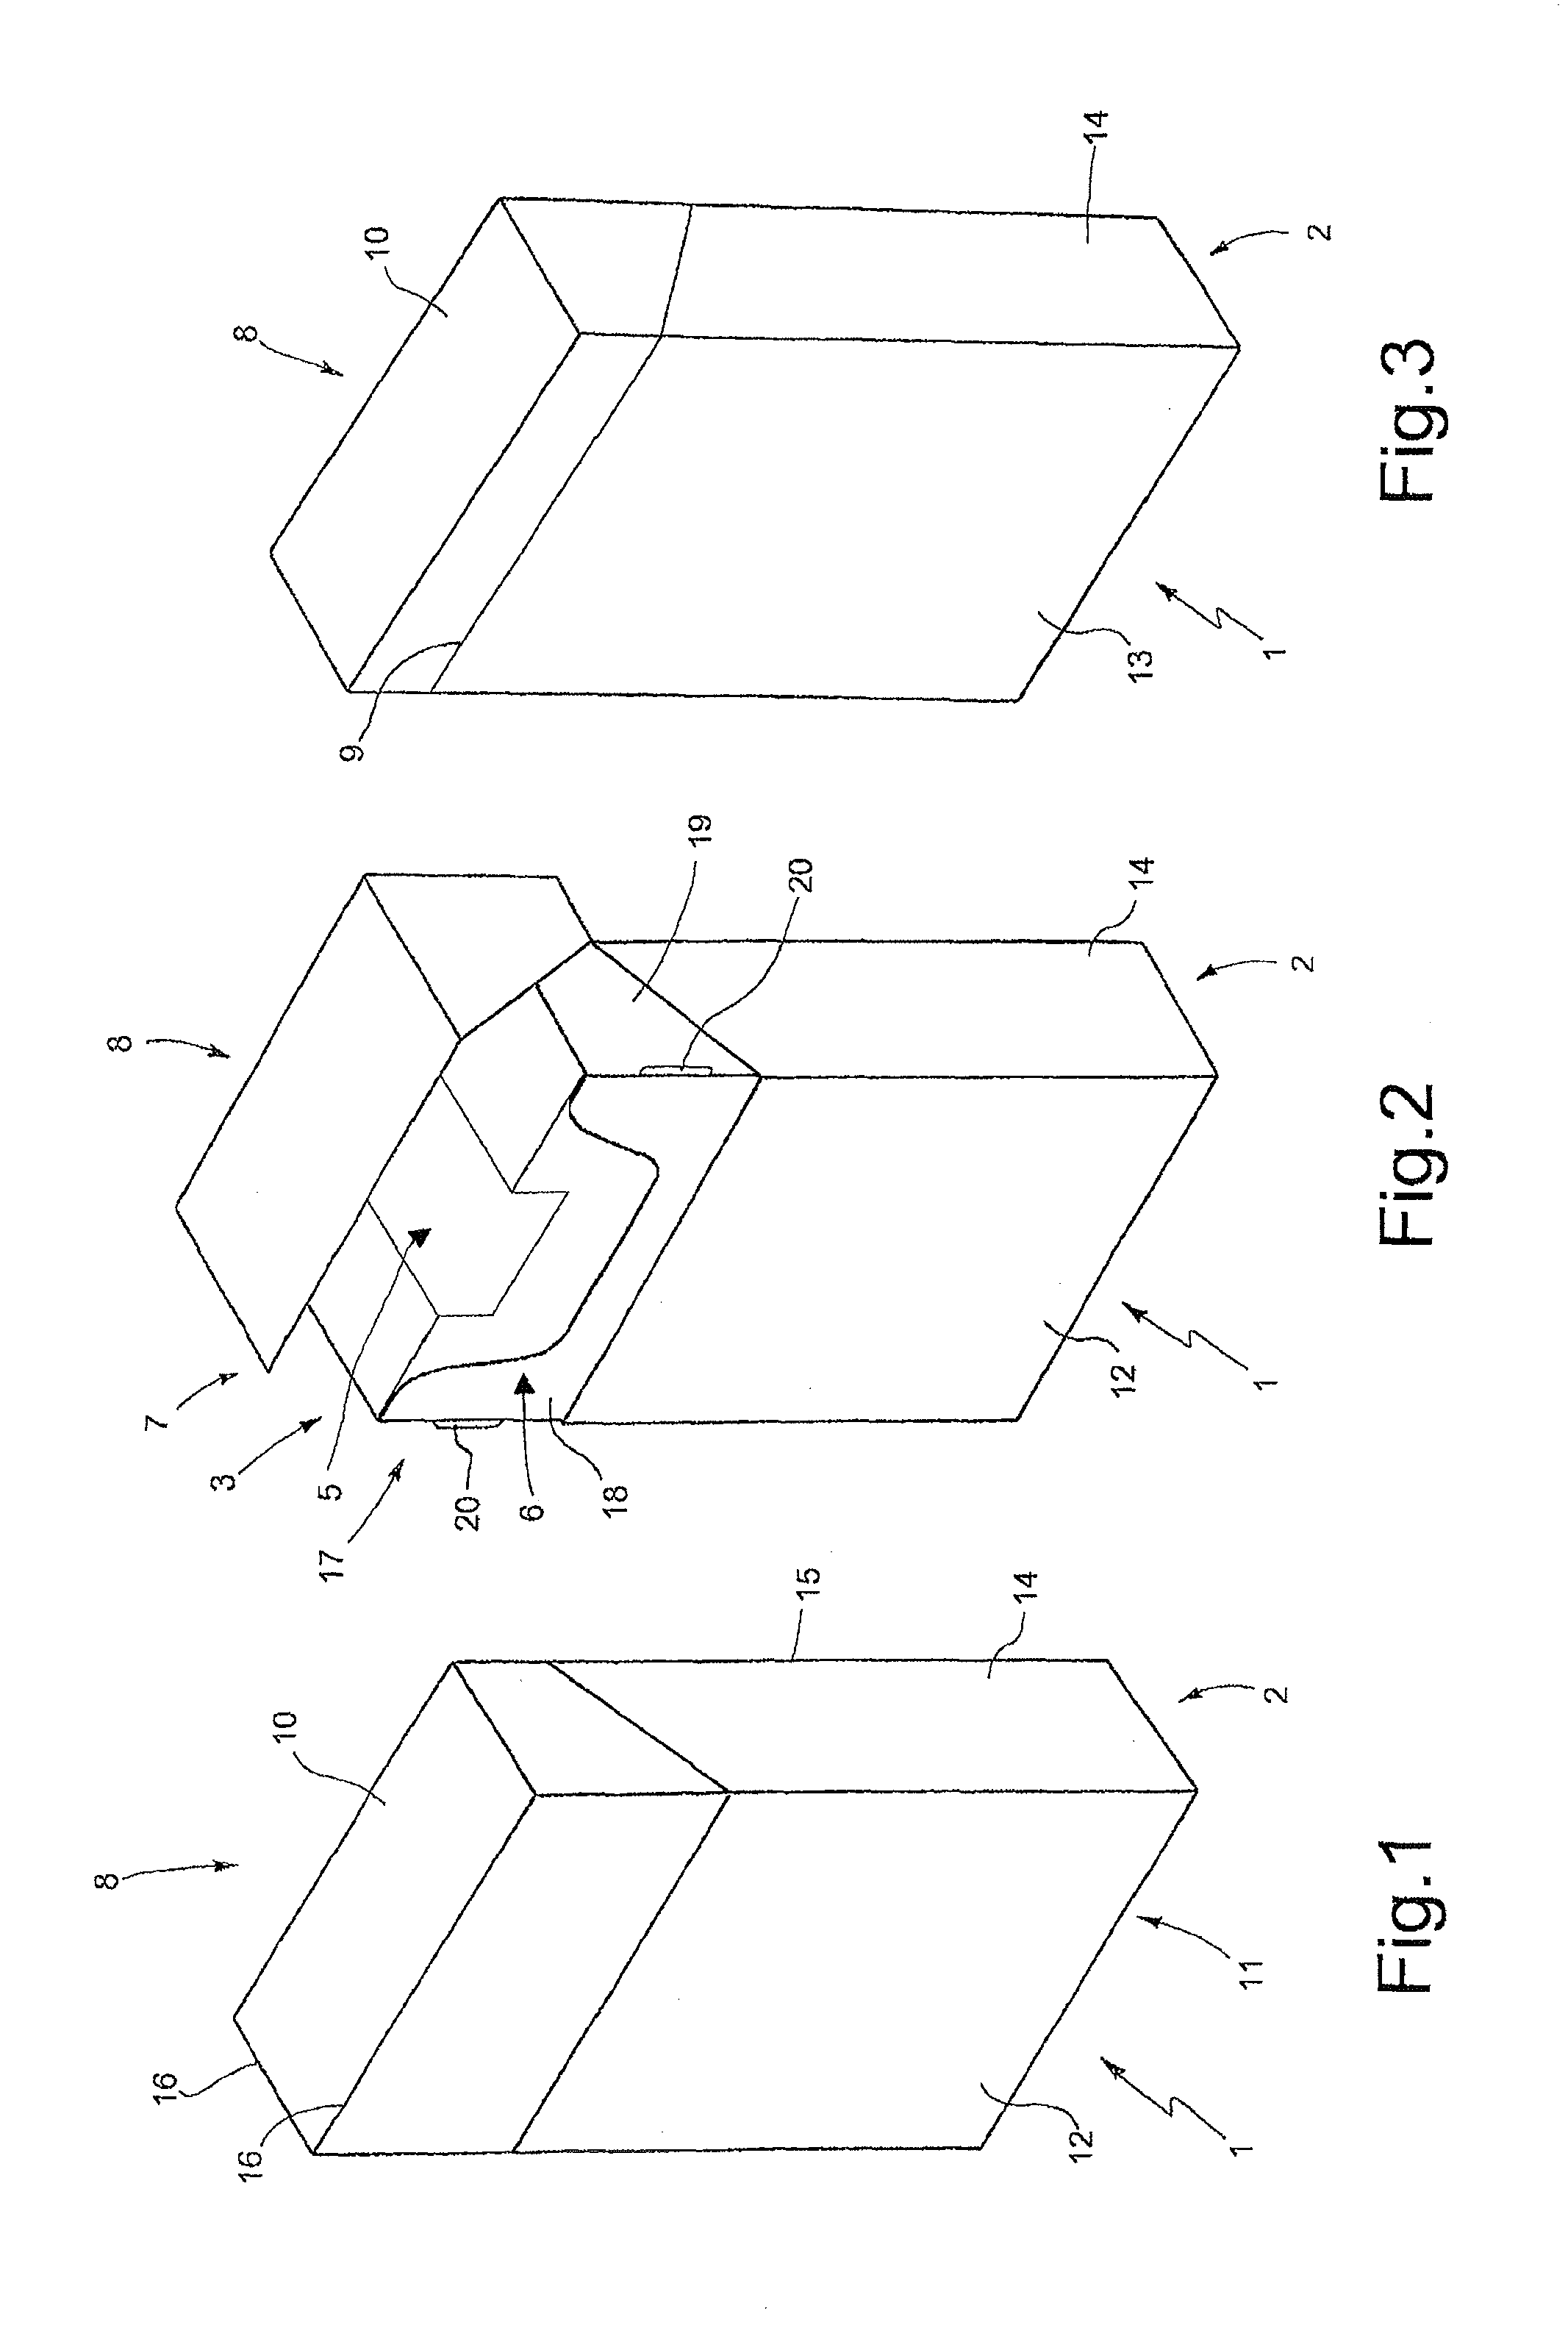 Package comprising a wrapping with a reclosable withdrawal opening, and relative packing method and machine